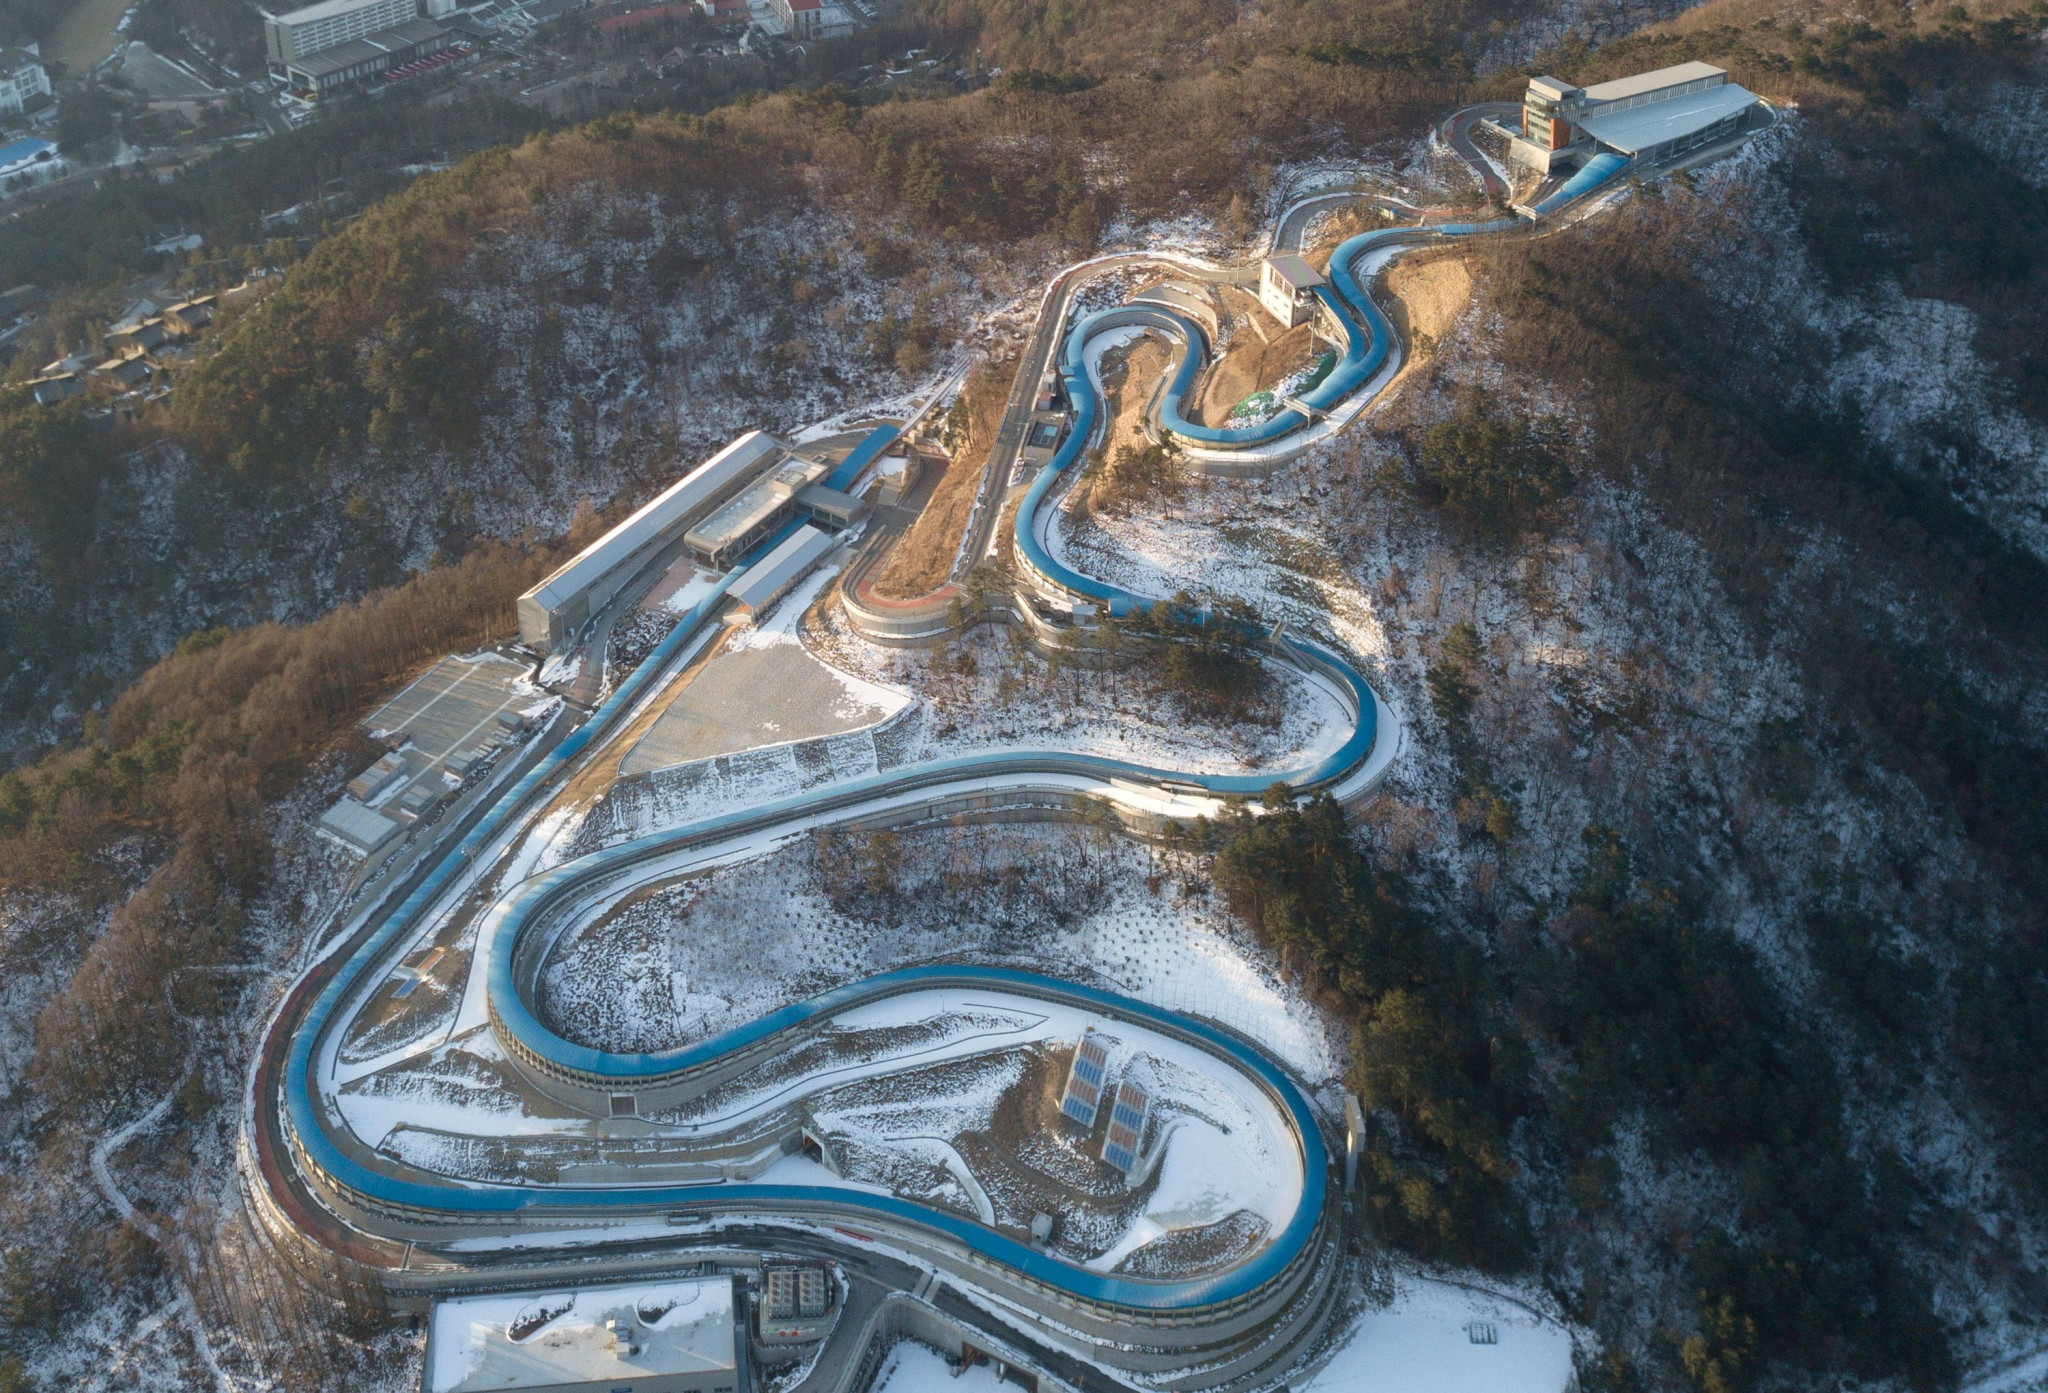 The Pyeongchang 2018 sliding venue hasn't been used on the World Cup circuit since the Games ©Getty Images